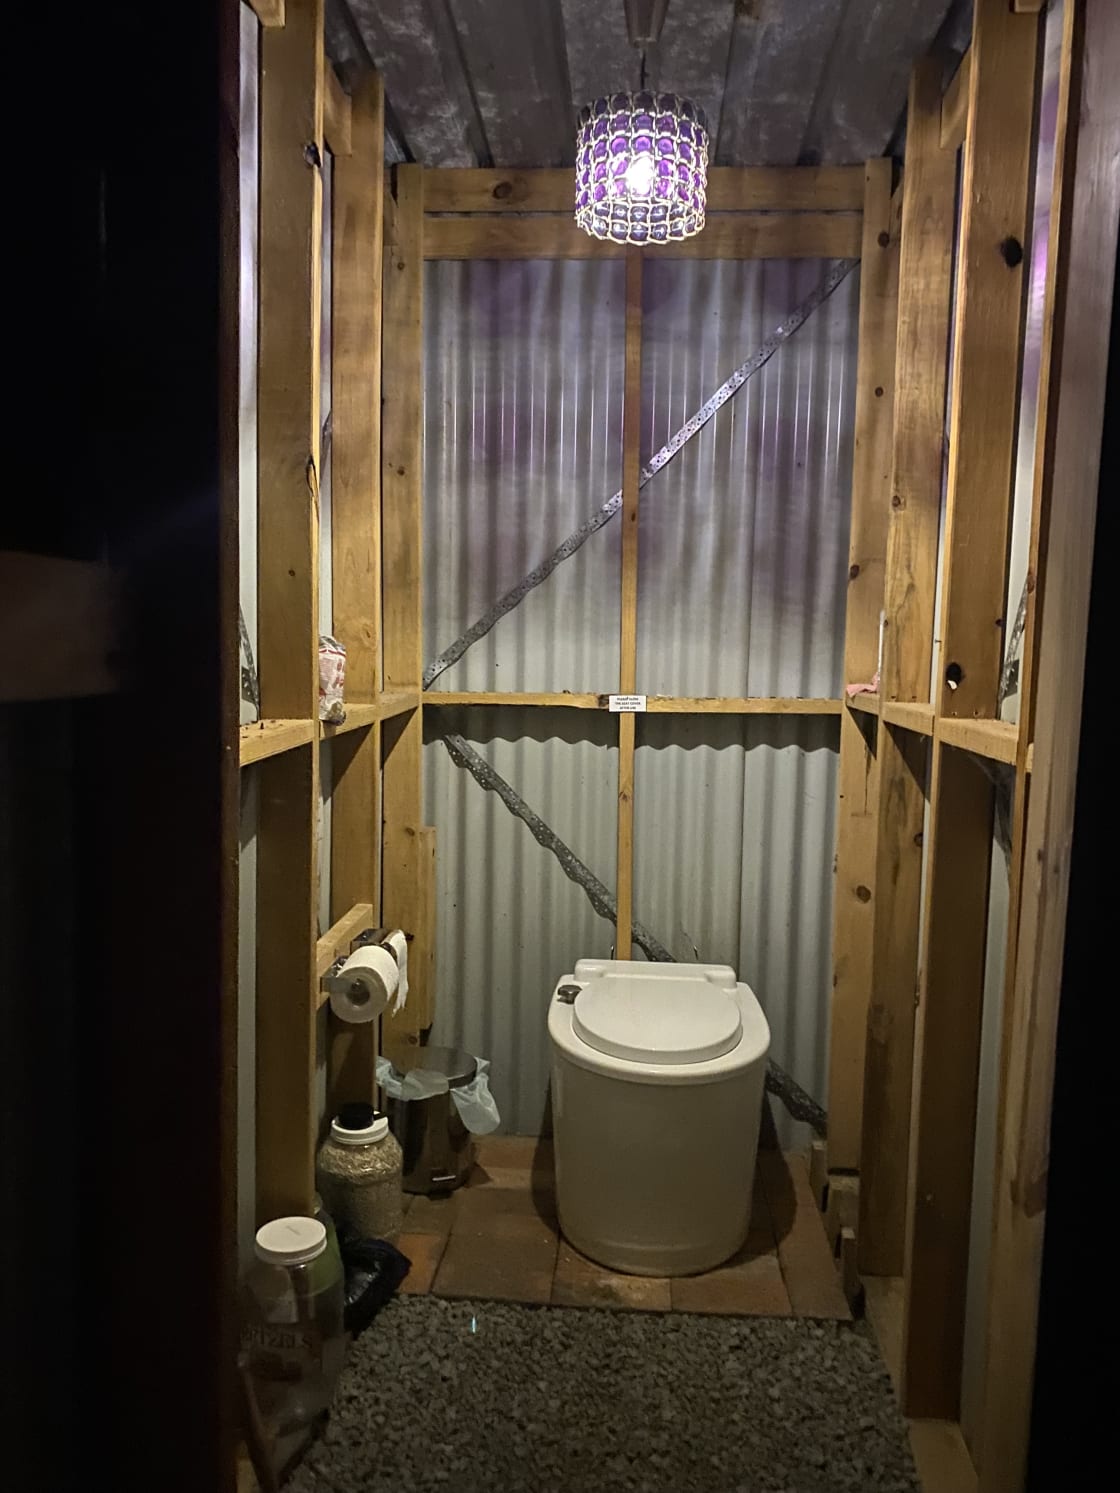 The toilet is well light up at night with night sensors and an eco friendly compostable toilet.